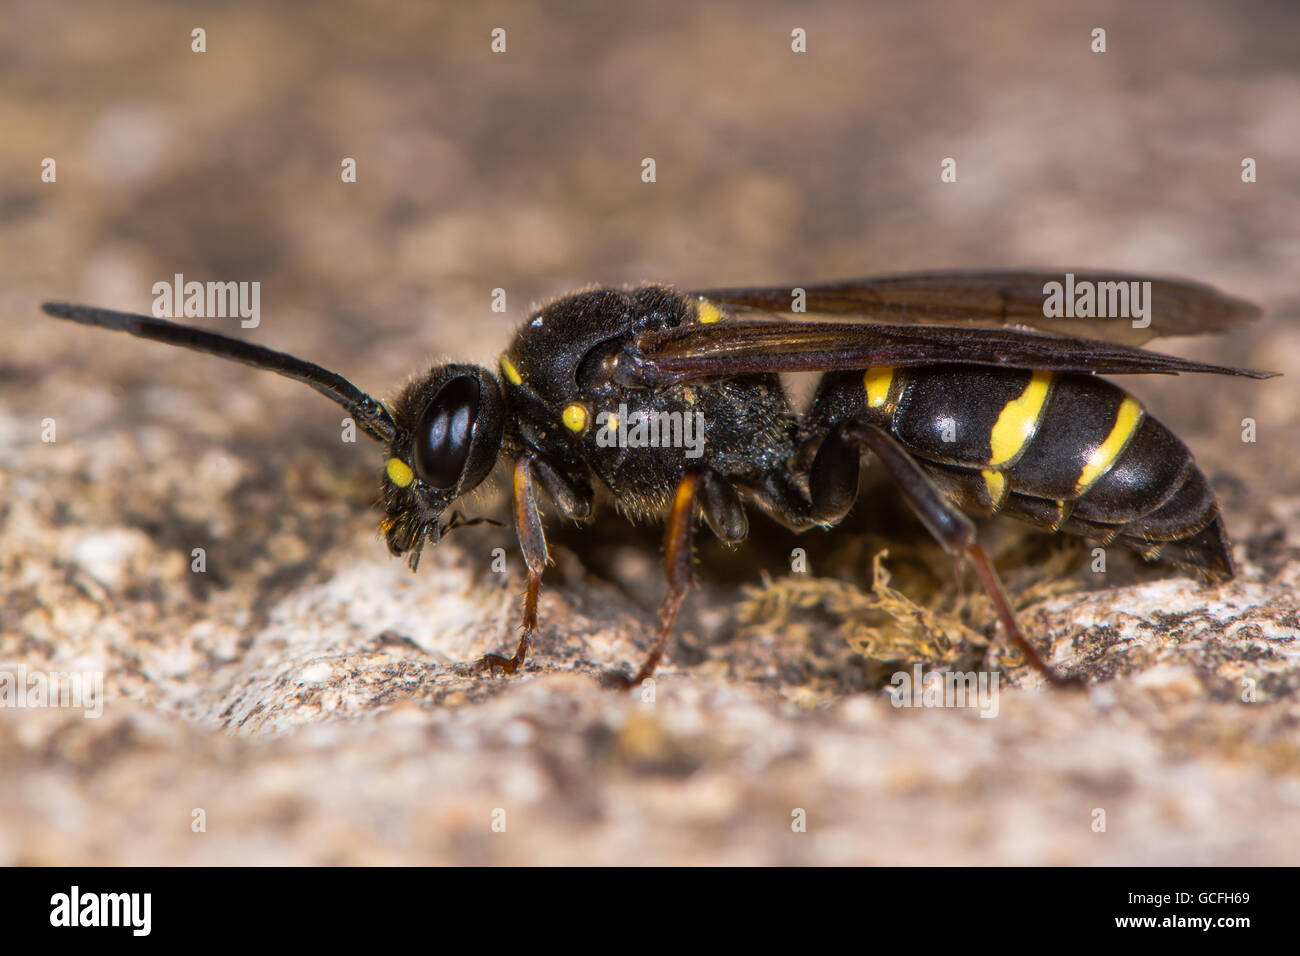 Digger wasp (Argogorytes mystaceus). Black and yellow insect in the family Crabronidae Stock Photo